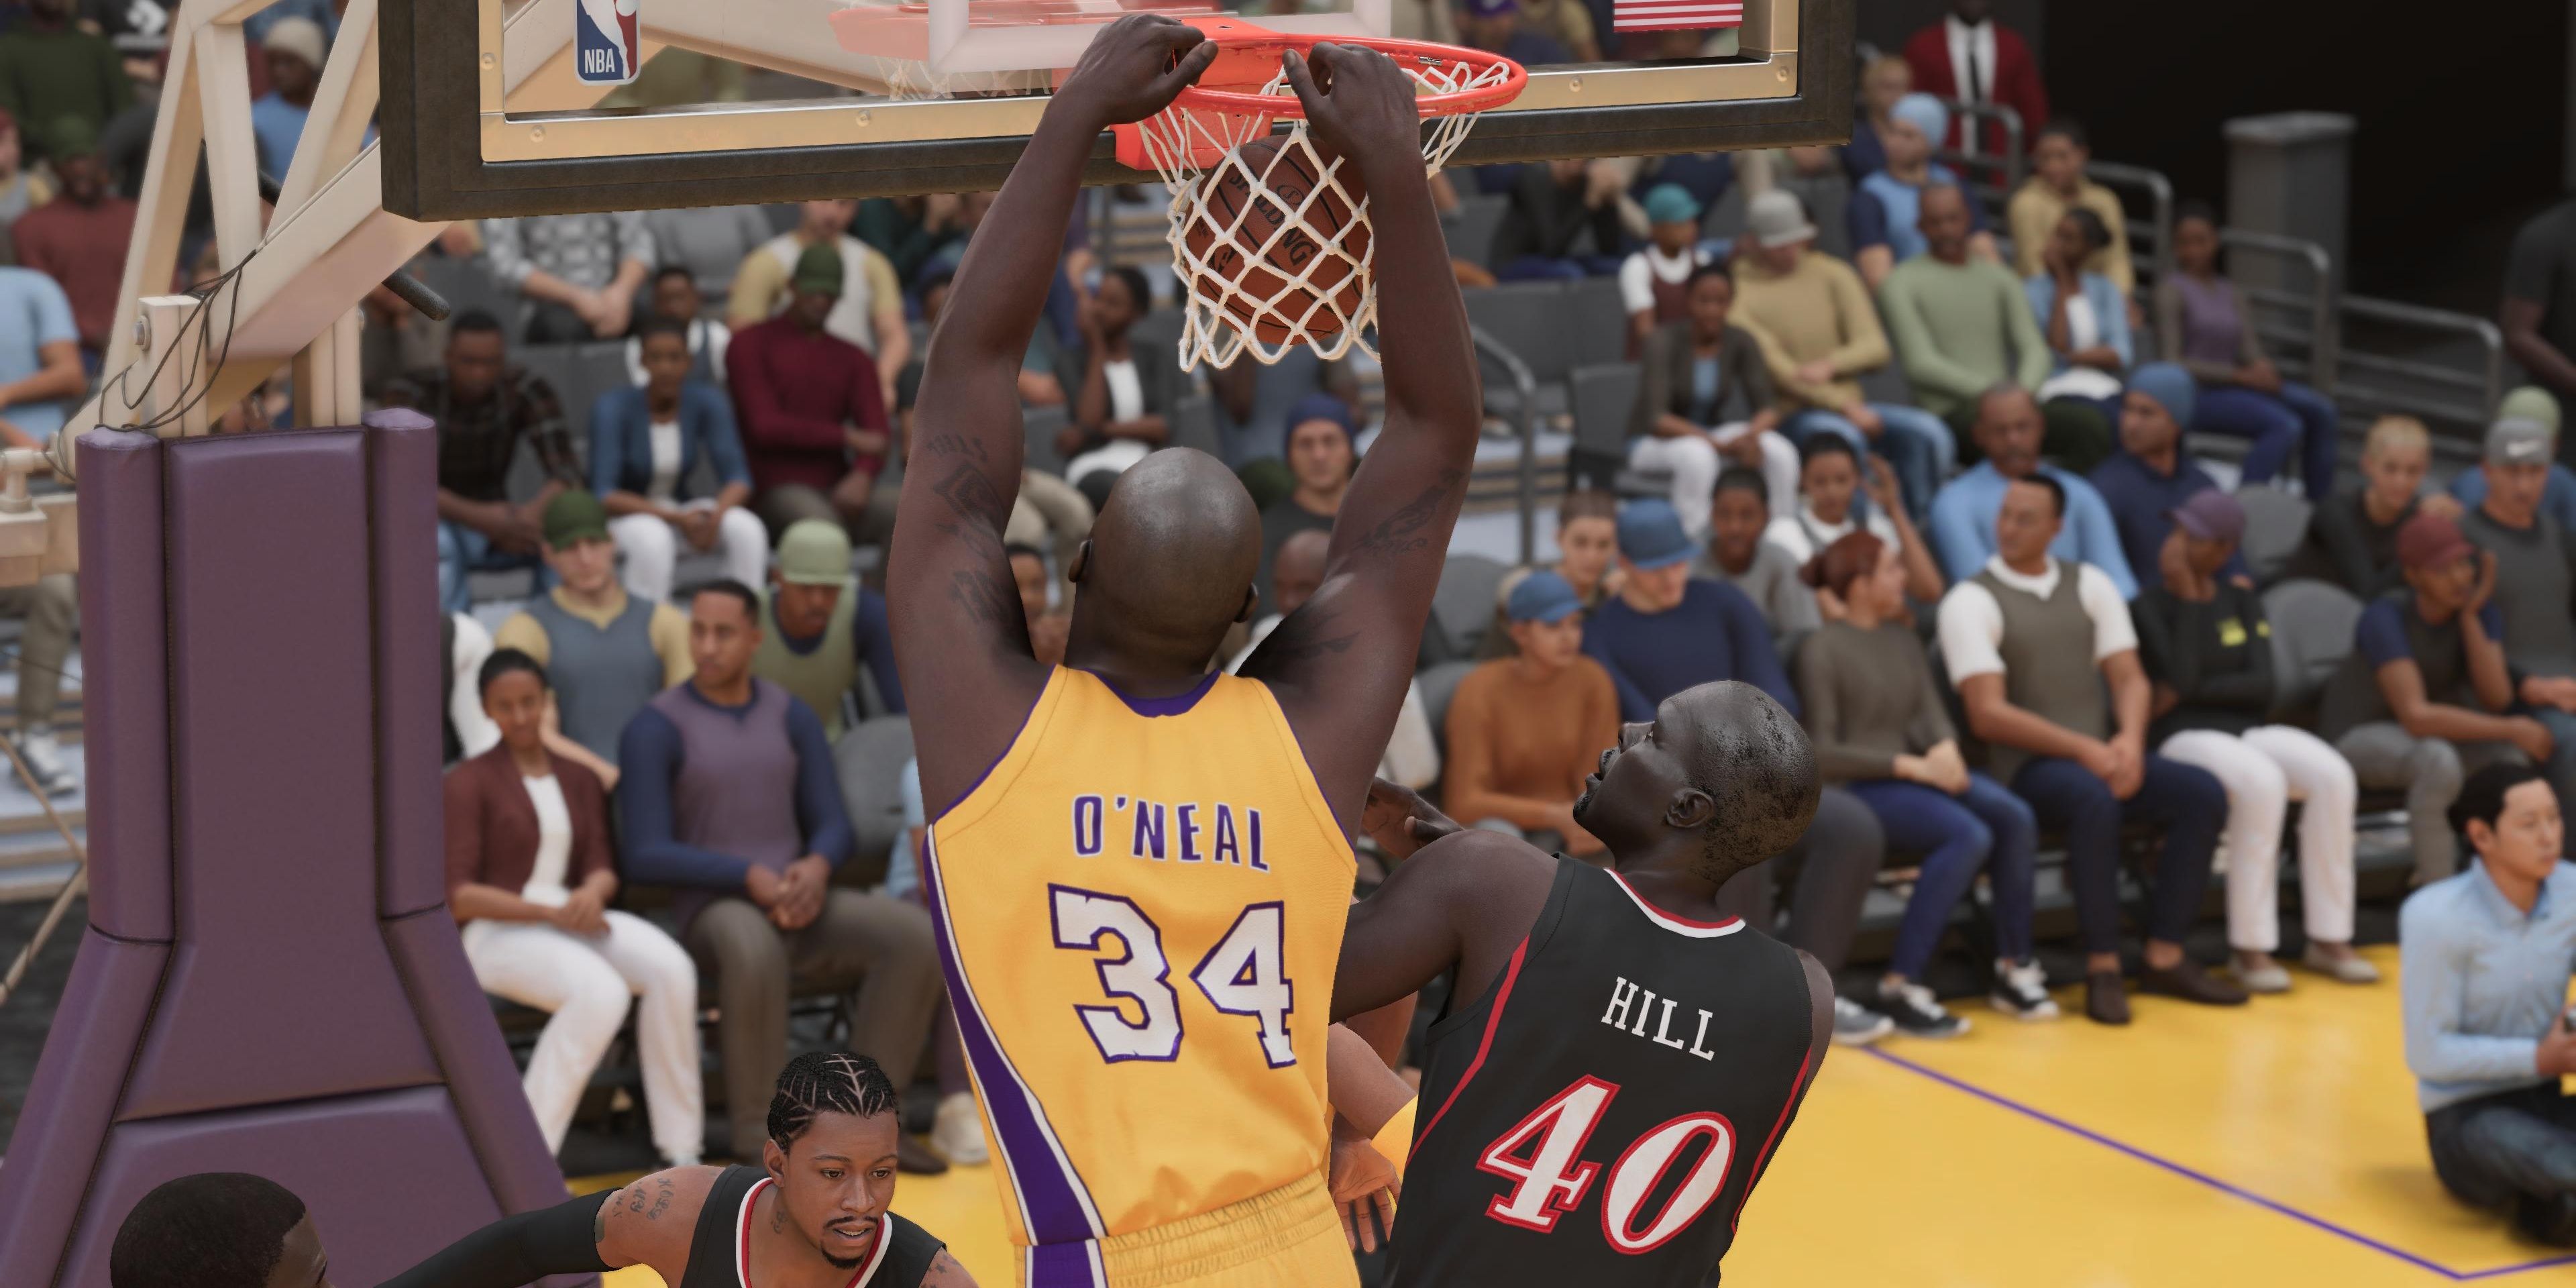 shaquille o'neal dunking